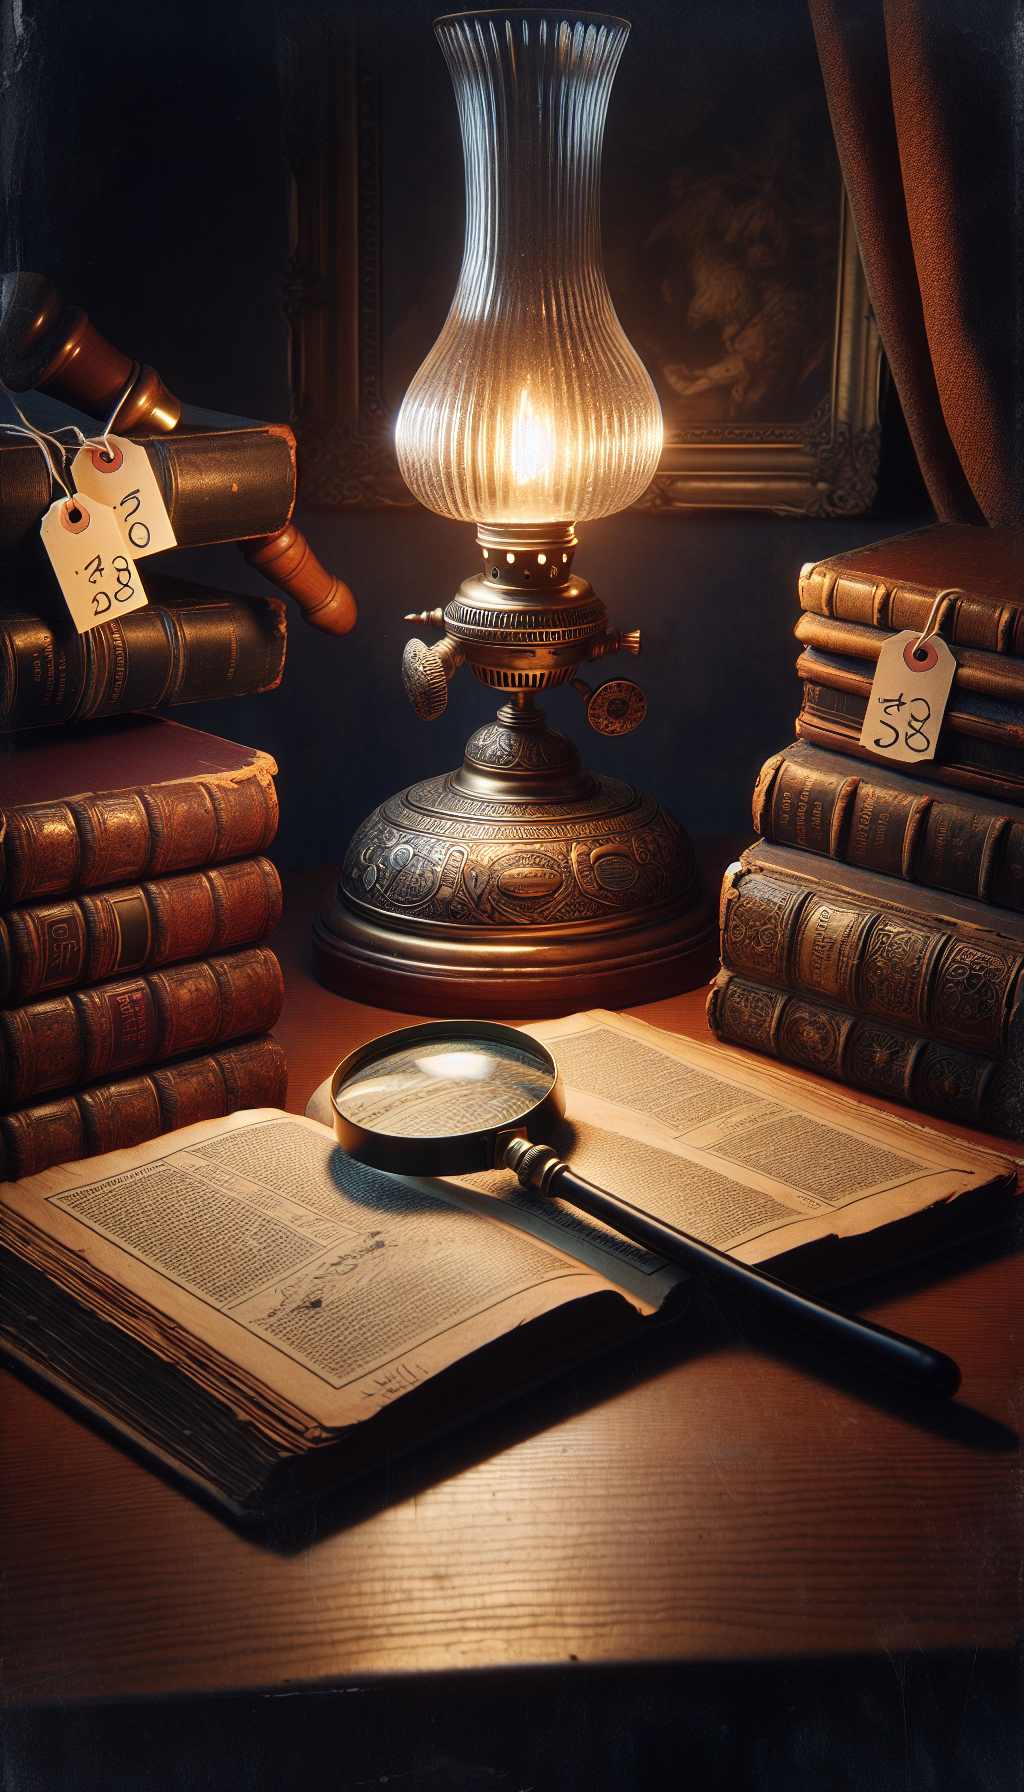 A vintage desk, bathed in the warm glow of an antique oil lamp, showcases an open book, "Collector's Guide," with magnifying glass revealing embossed marks and intricate signatures on the lamp's base. Shadowed in the background, an auctioneer's gavel hints at the lamp's high value, as a price tag with a hefty sum dangles from its ornate handle.